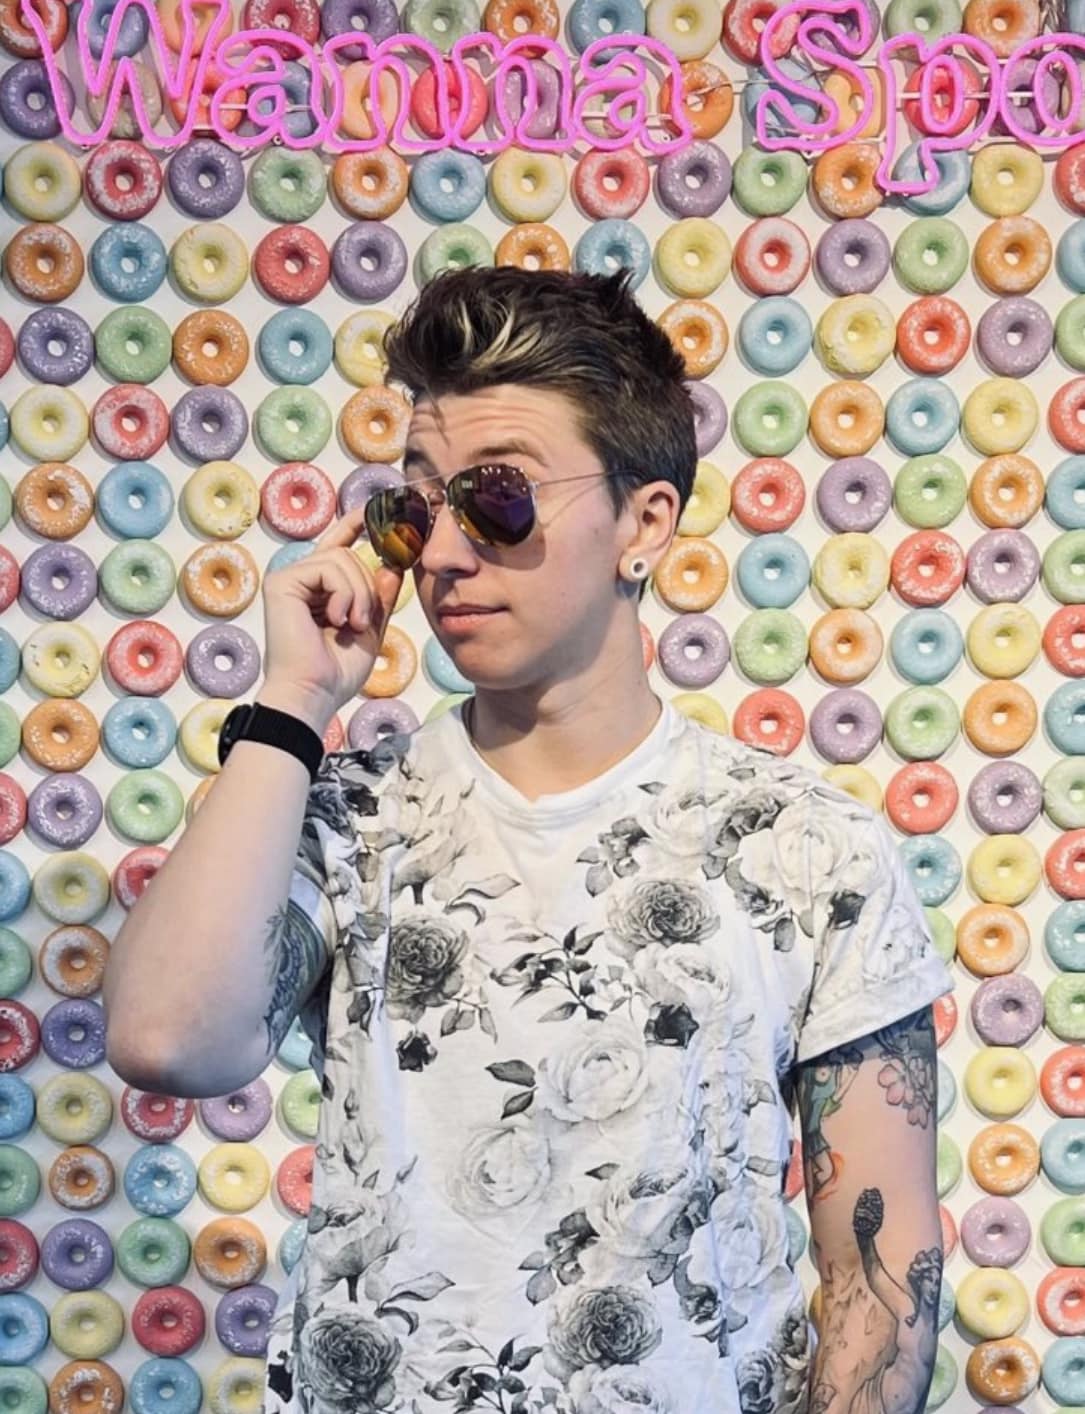 A picture of me, Rowan Bell. I have pale pink skin, short brown hair, and multiple tattoos on my arms. I'm wearing a white T-shirt with black and grey flowers, and I'm adjusting my sunglasses. I'm standing against a background image of multi-colored round cereal pieces.